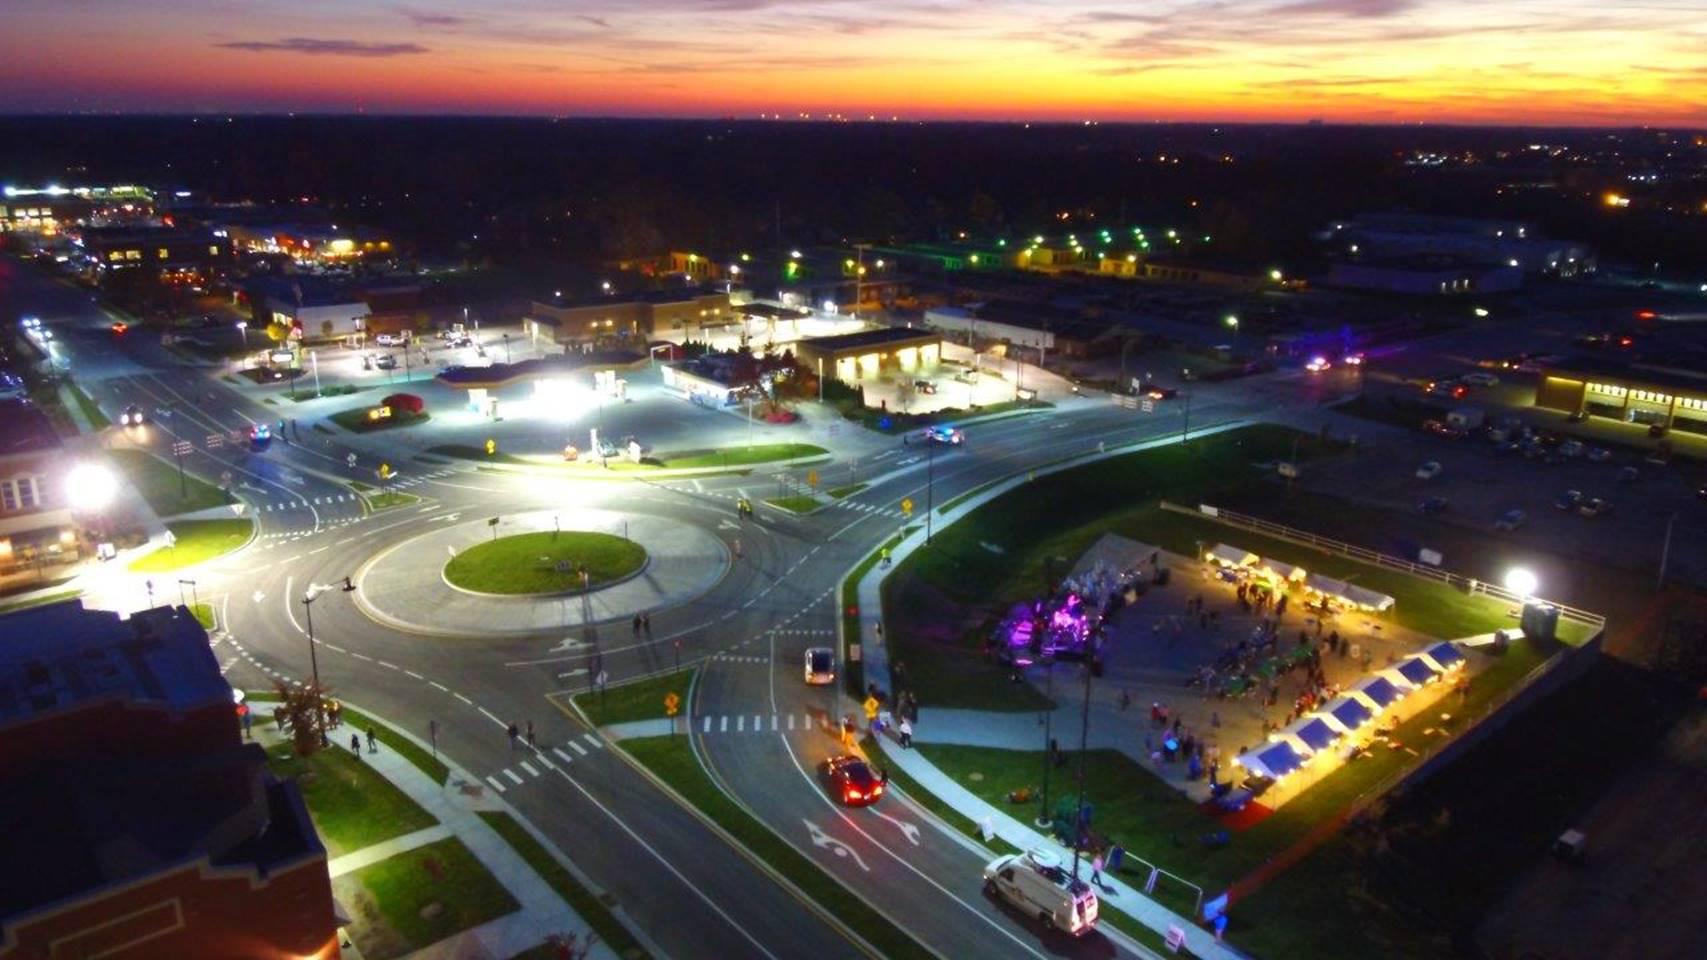 A night shot taken of the 100th roundabout in Carmel, Indiana.